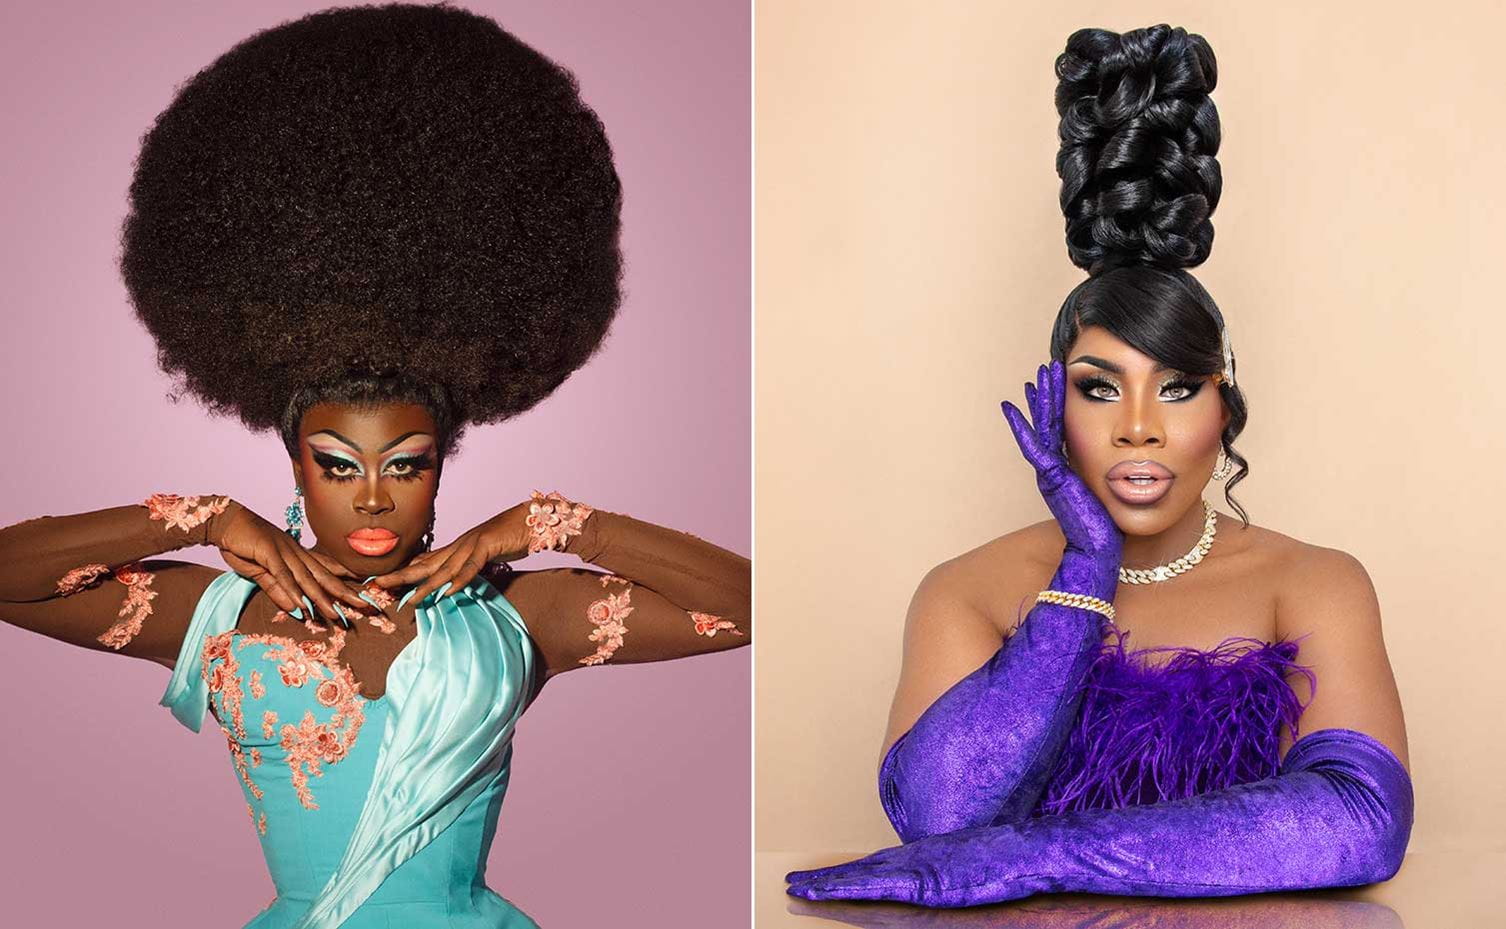 Bob the Drag Queen and Monet X Change